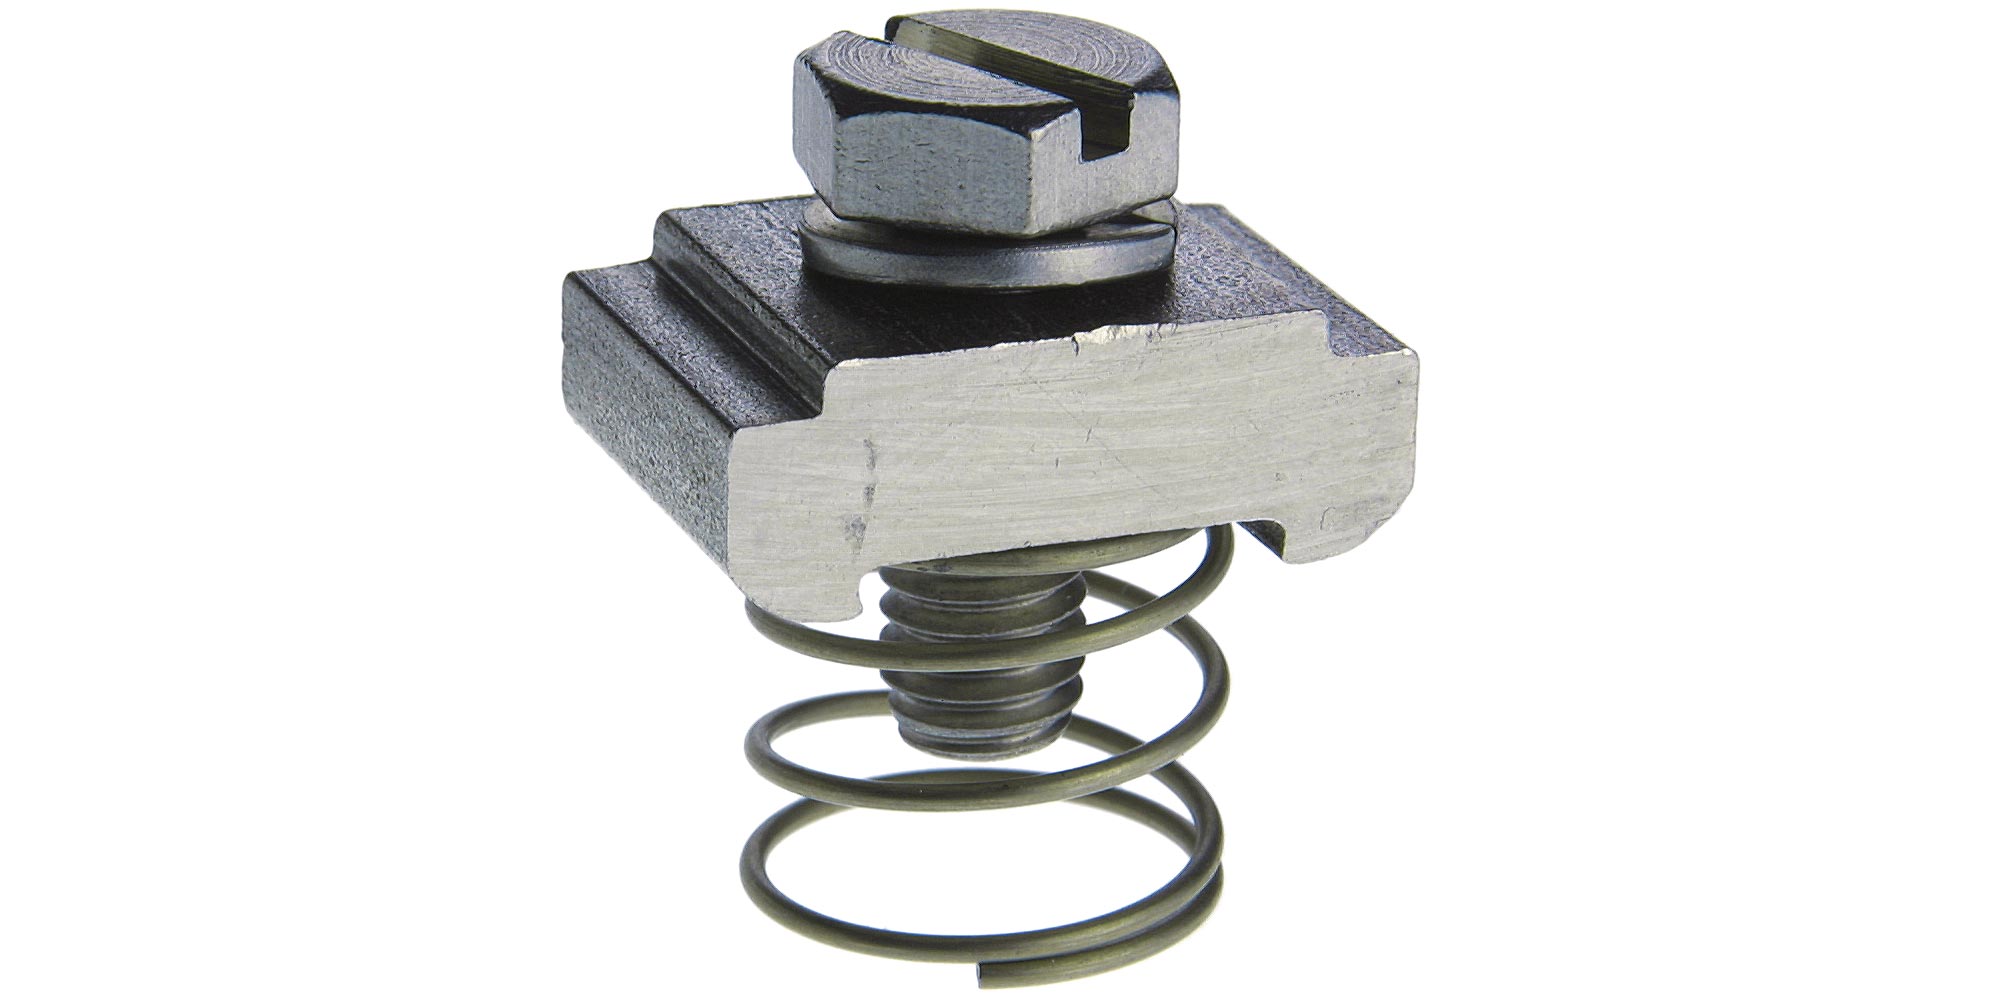 Sliding blocks C30 M6 stainless steel with screw, with spring